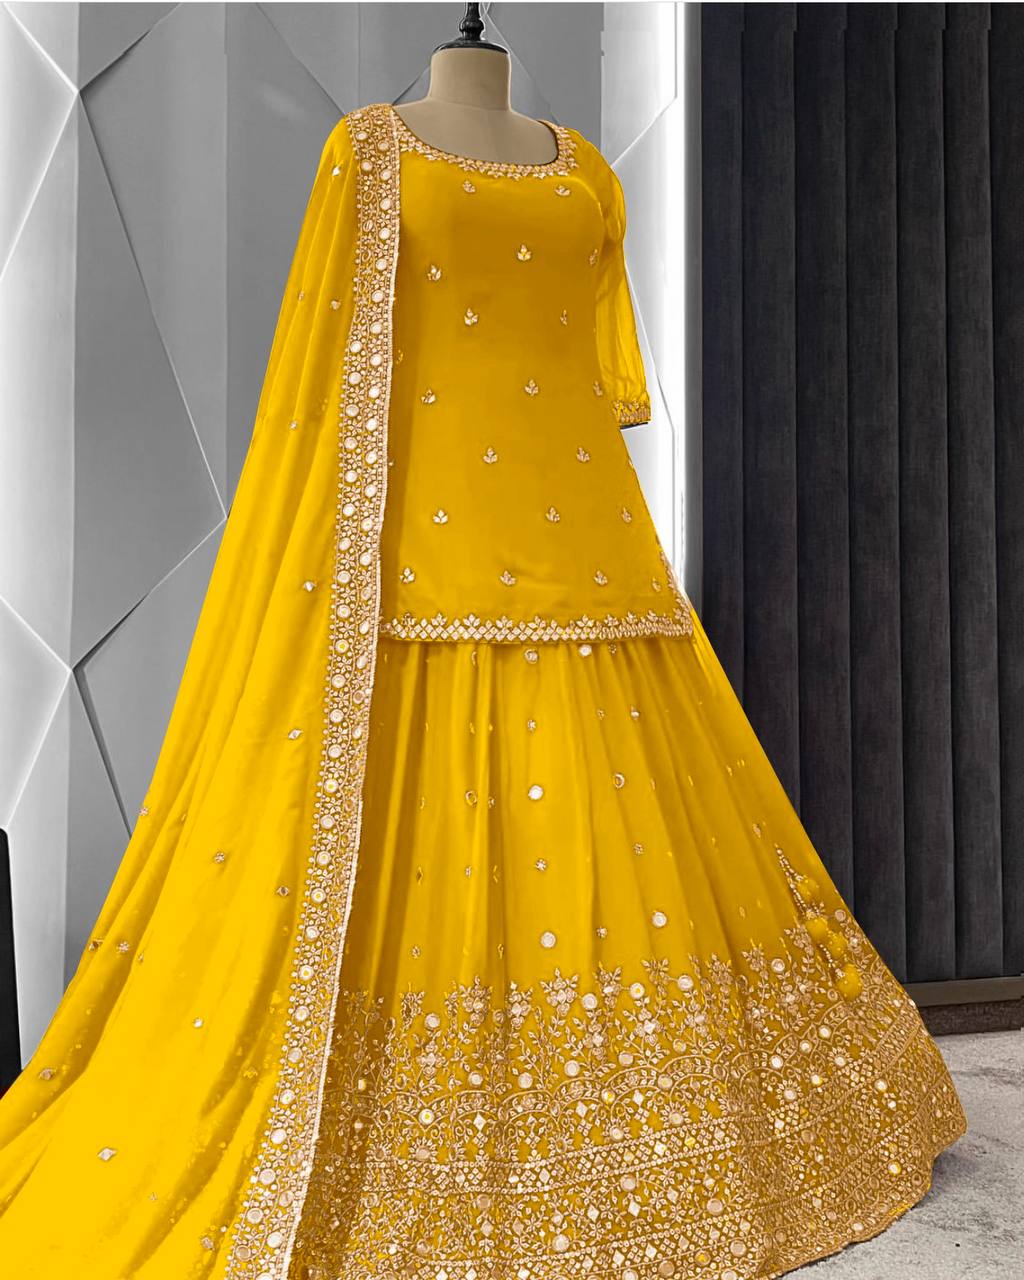 Marvelous Embroidery Work Yellow Color Lehenga With Top